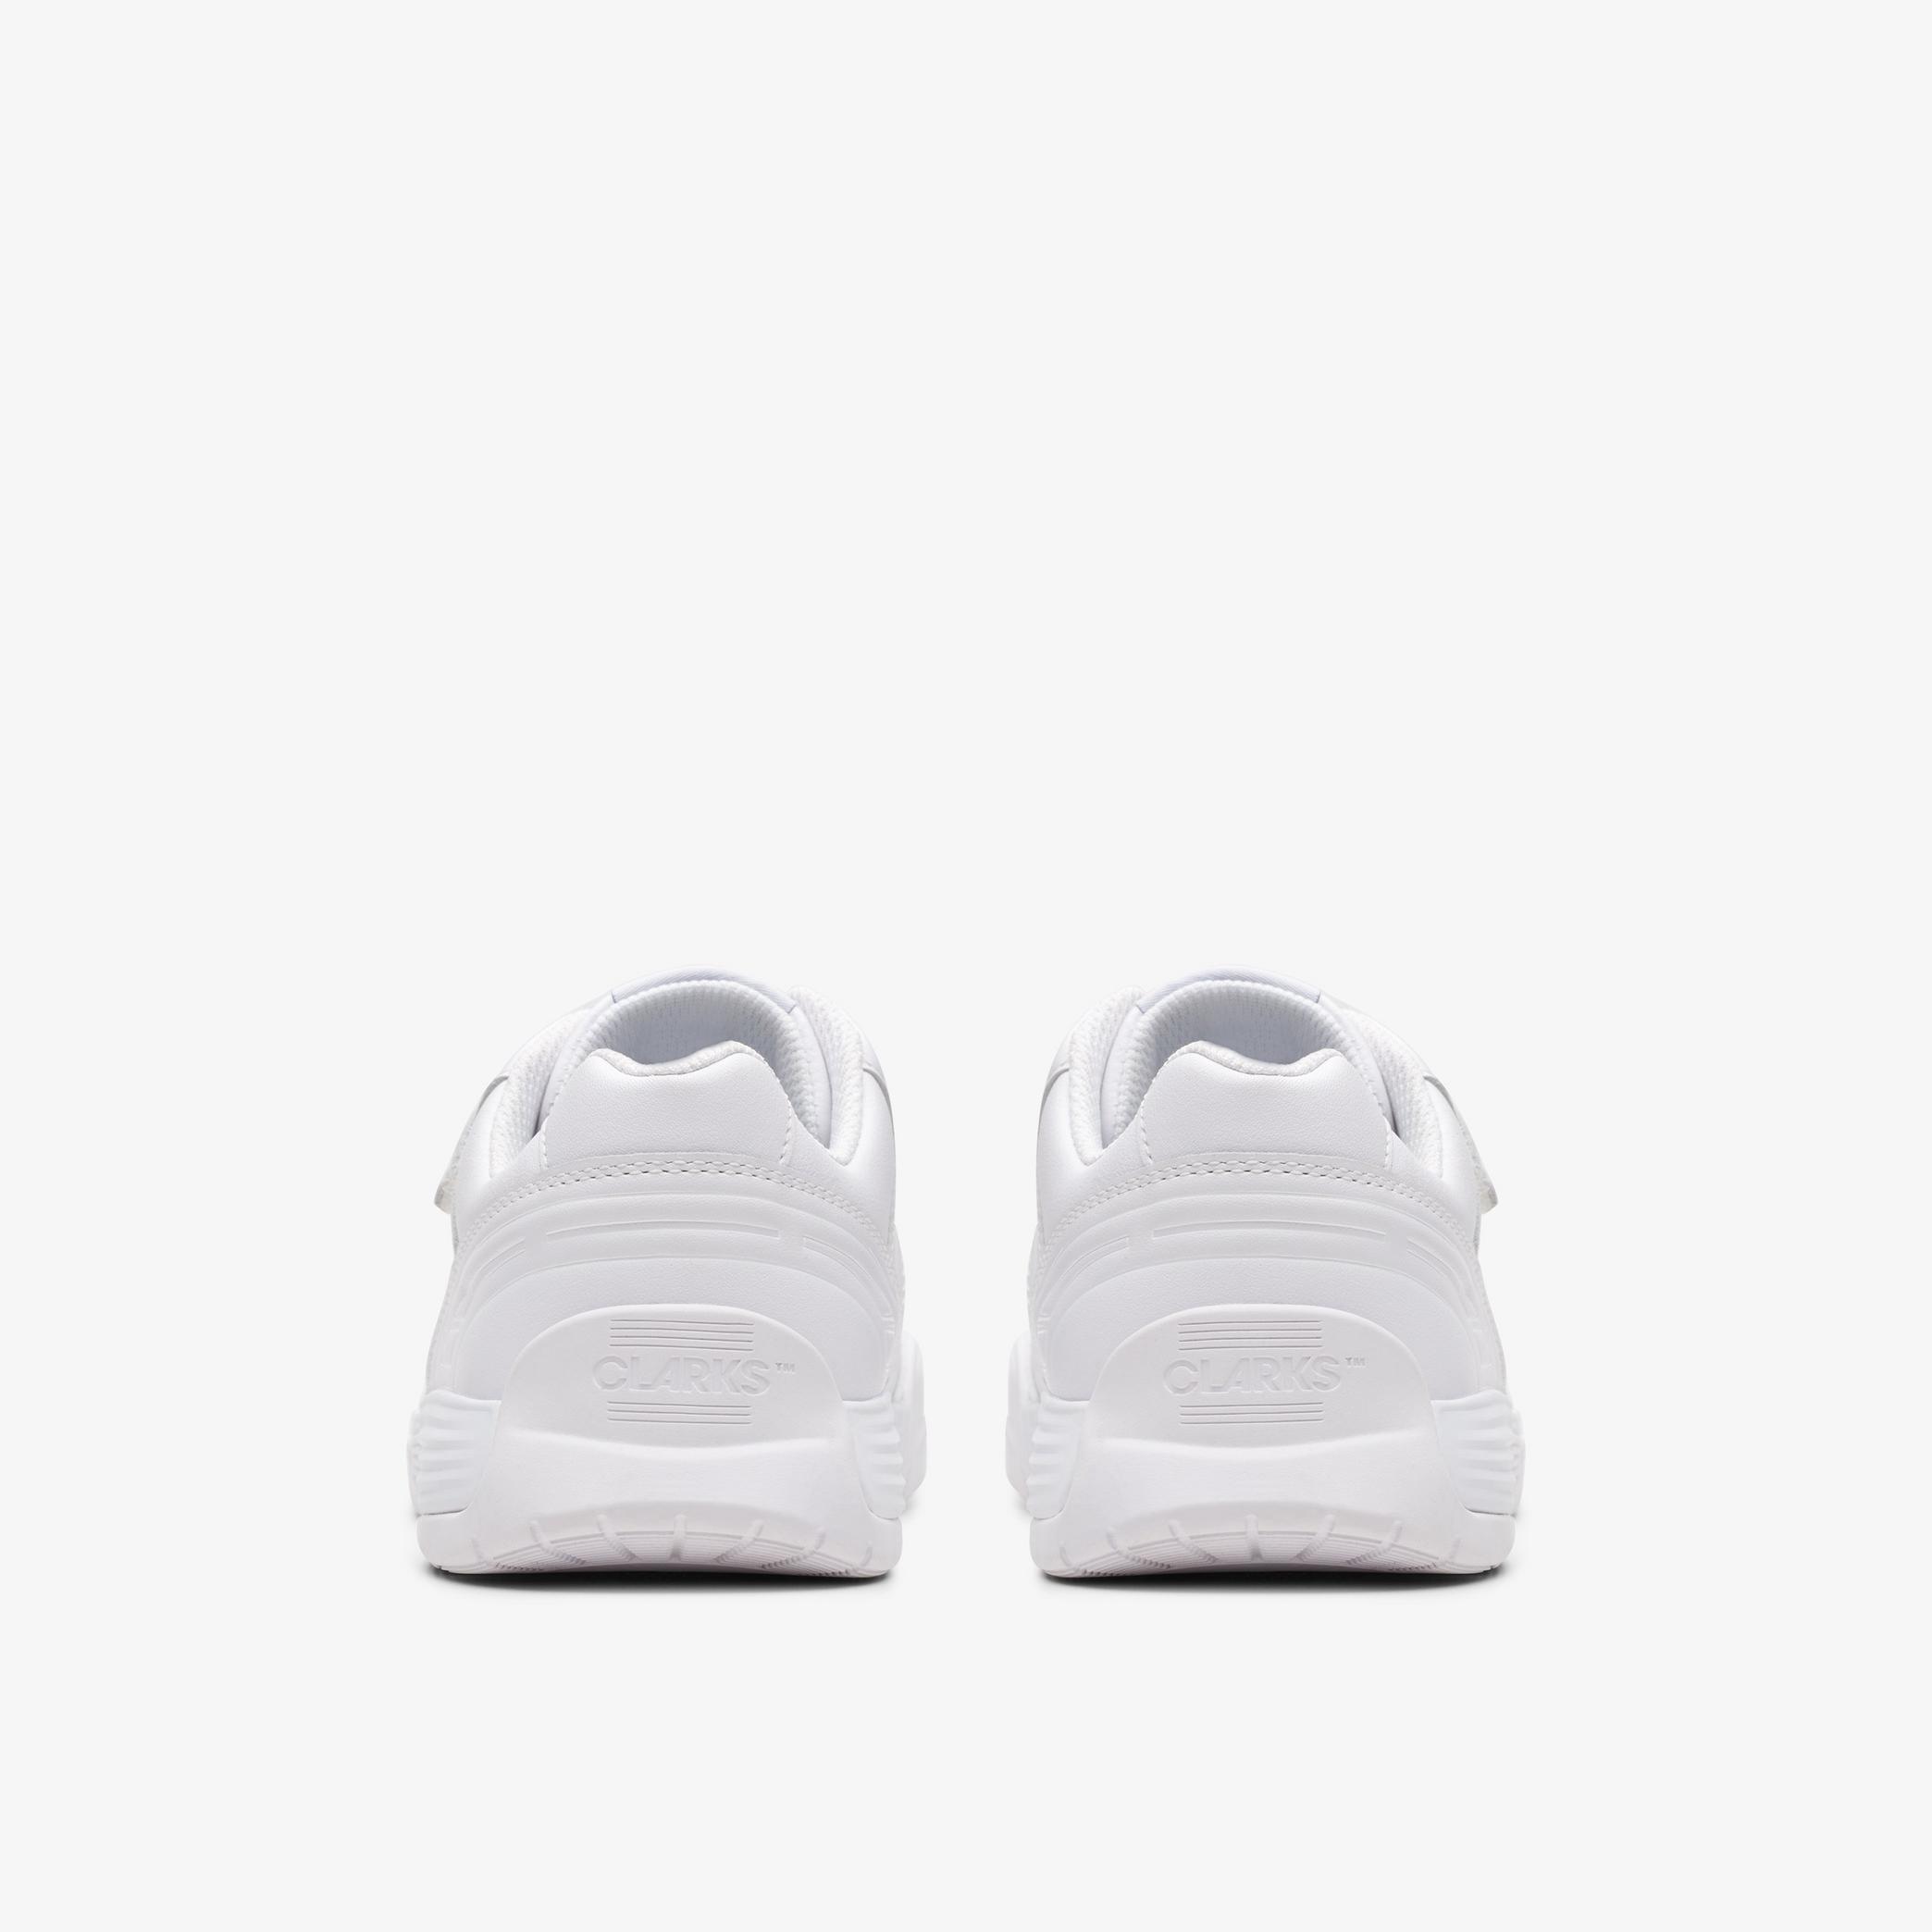 BOYS CICA Star Orb Youth White Trainers | Clarks UK